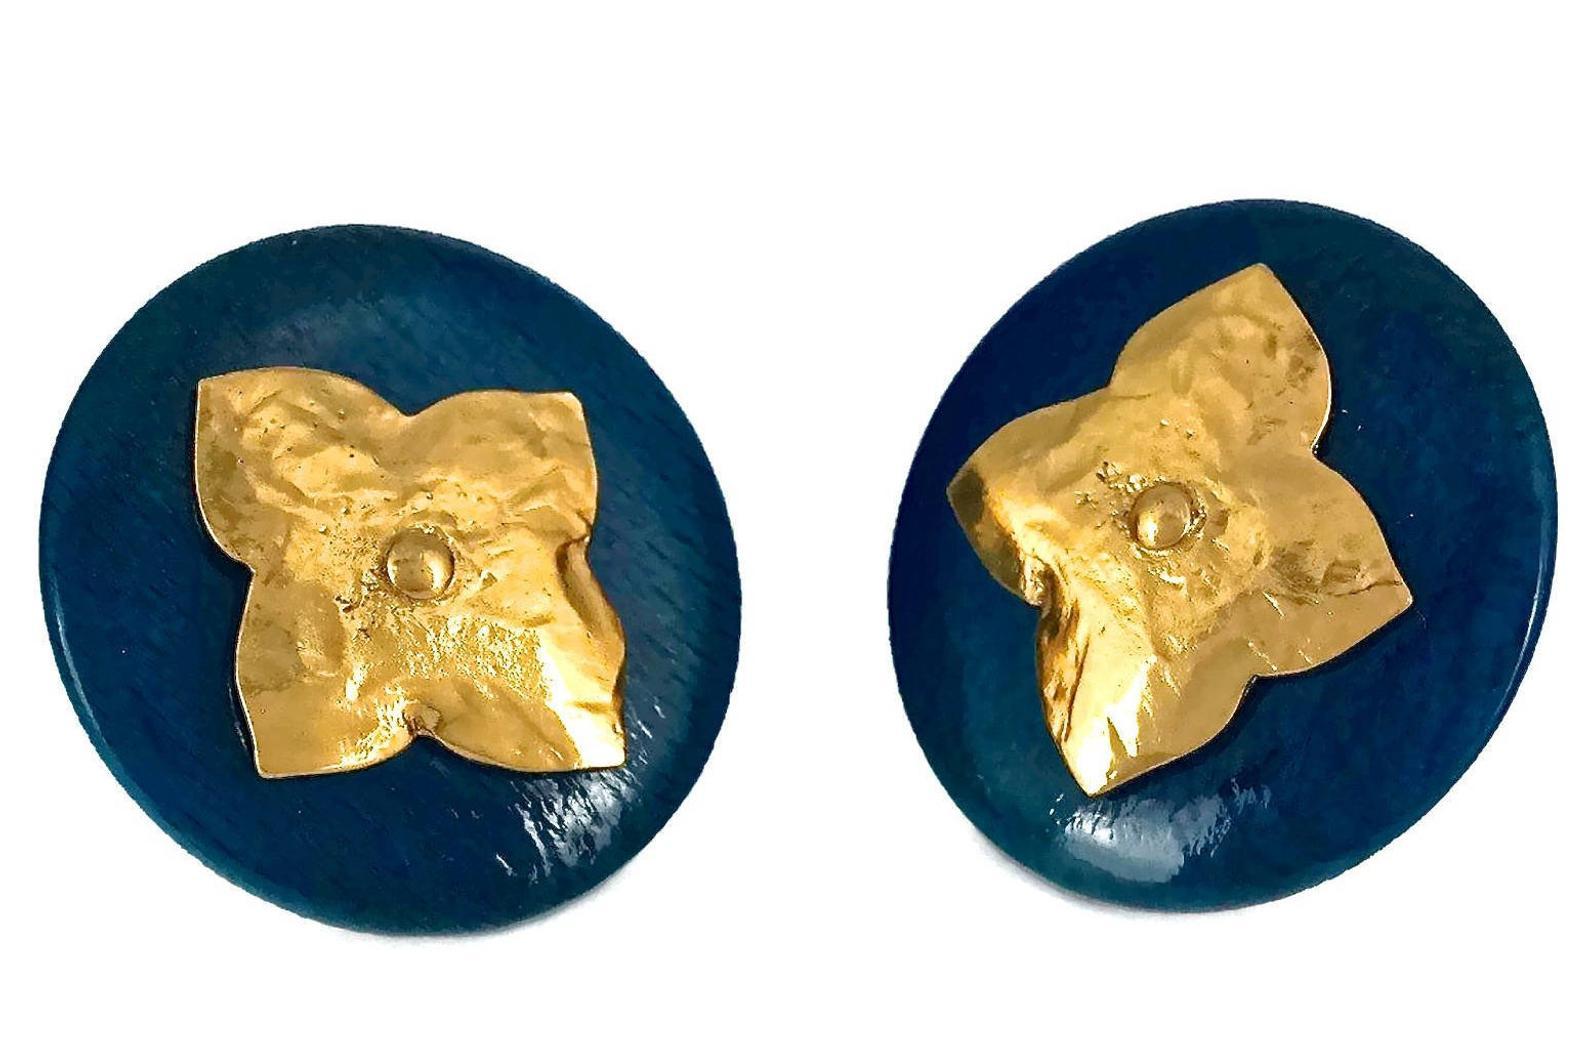 Vintage YVES SAINT LAURENT Ysl Blue Wood Textured Gilt Flower Earrings In Excellent Condition For Sale In Kingersheim, Alsace